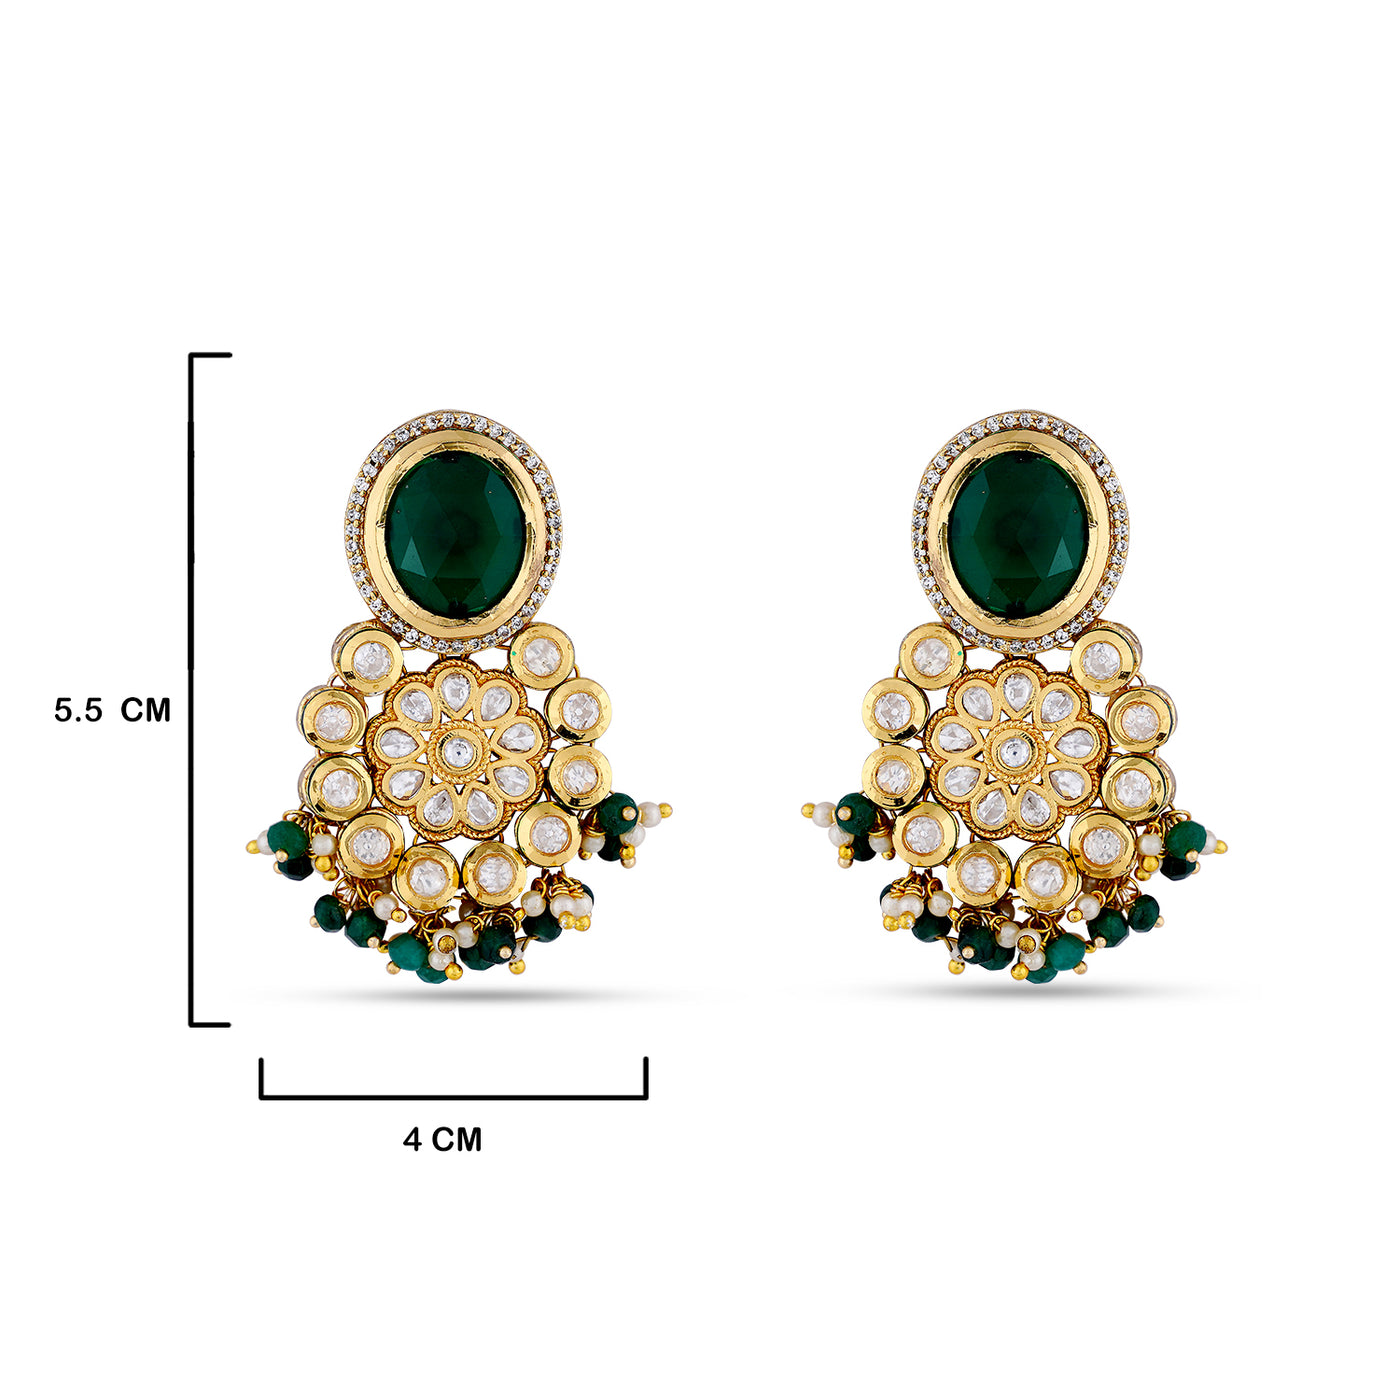 Green Centred Kundan Earrings with measurements in cm. 5.5cm by 4cm.